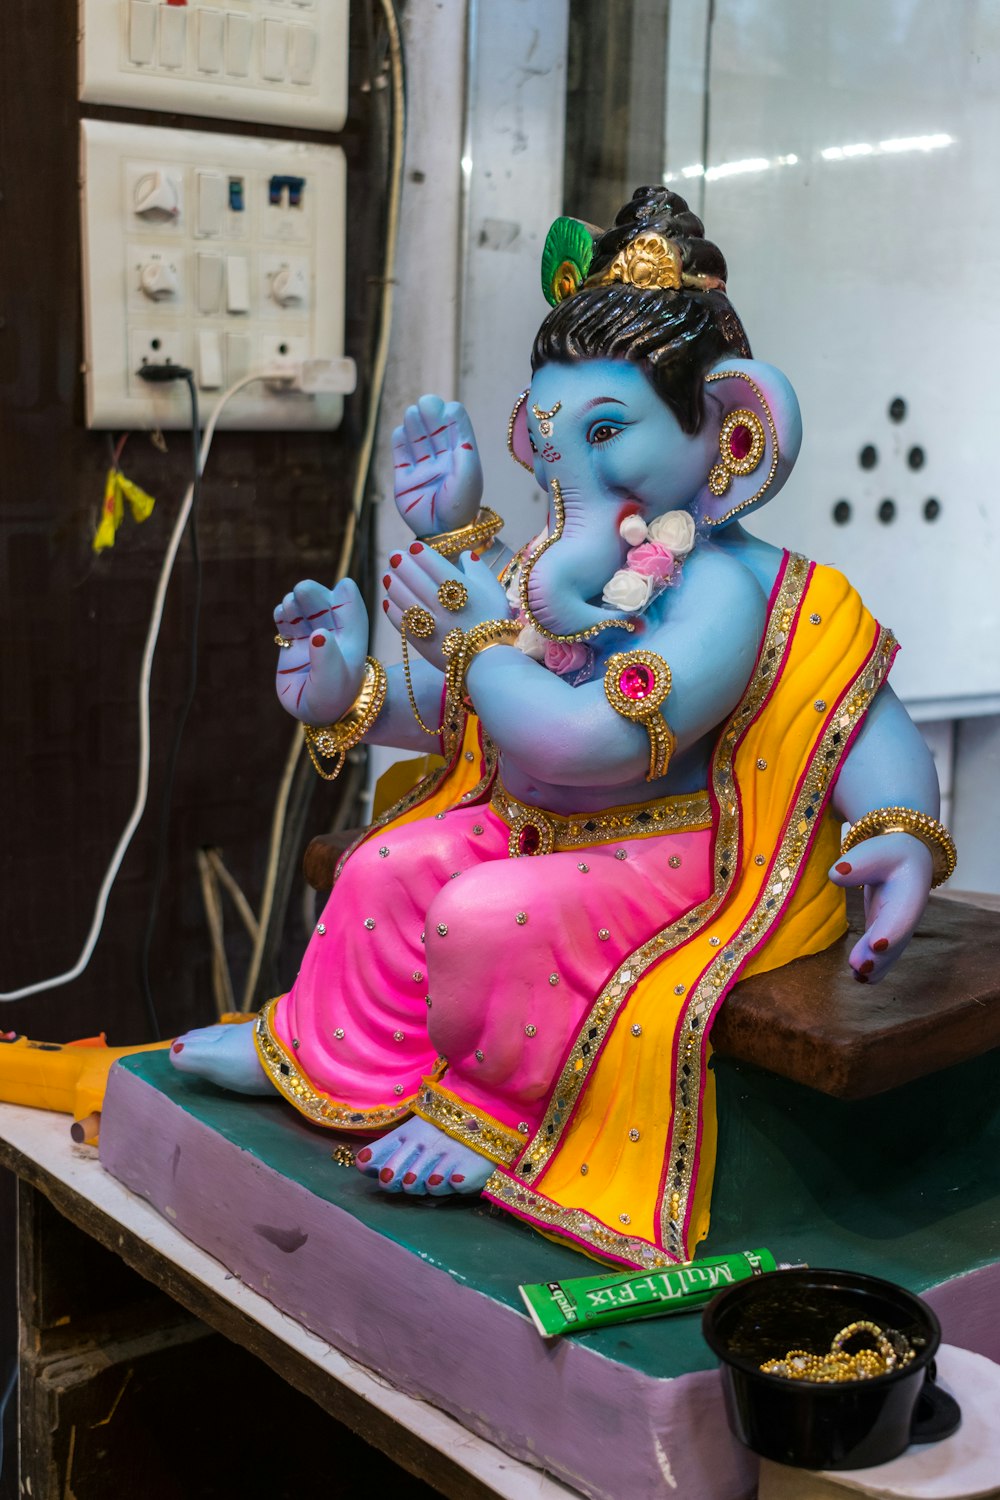 a statue of a hindu god sitting on a table